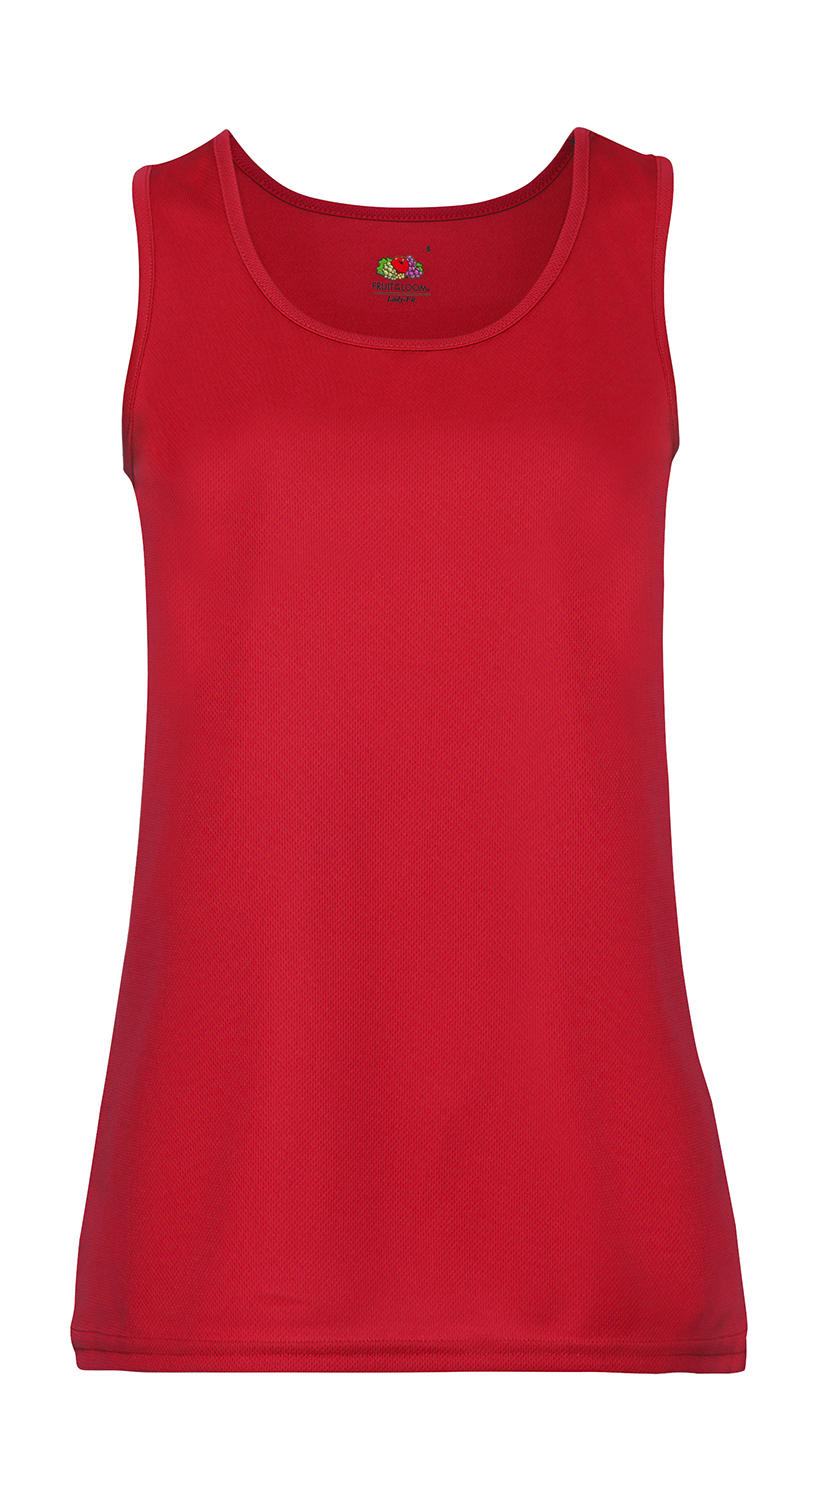  Ladies Performance Vest in Farbe Red